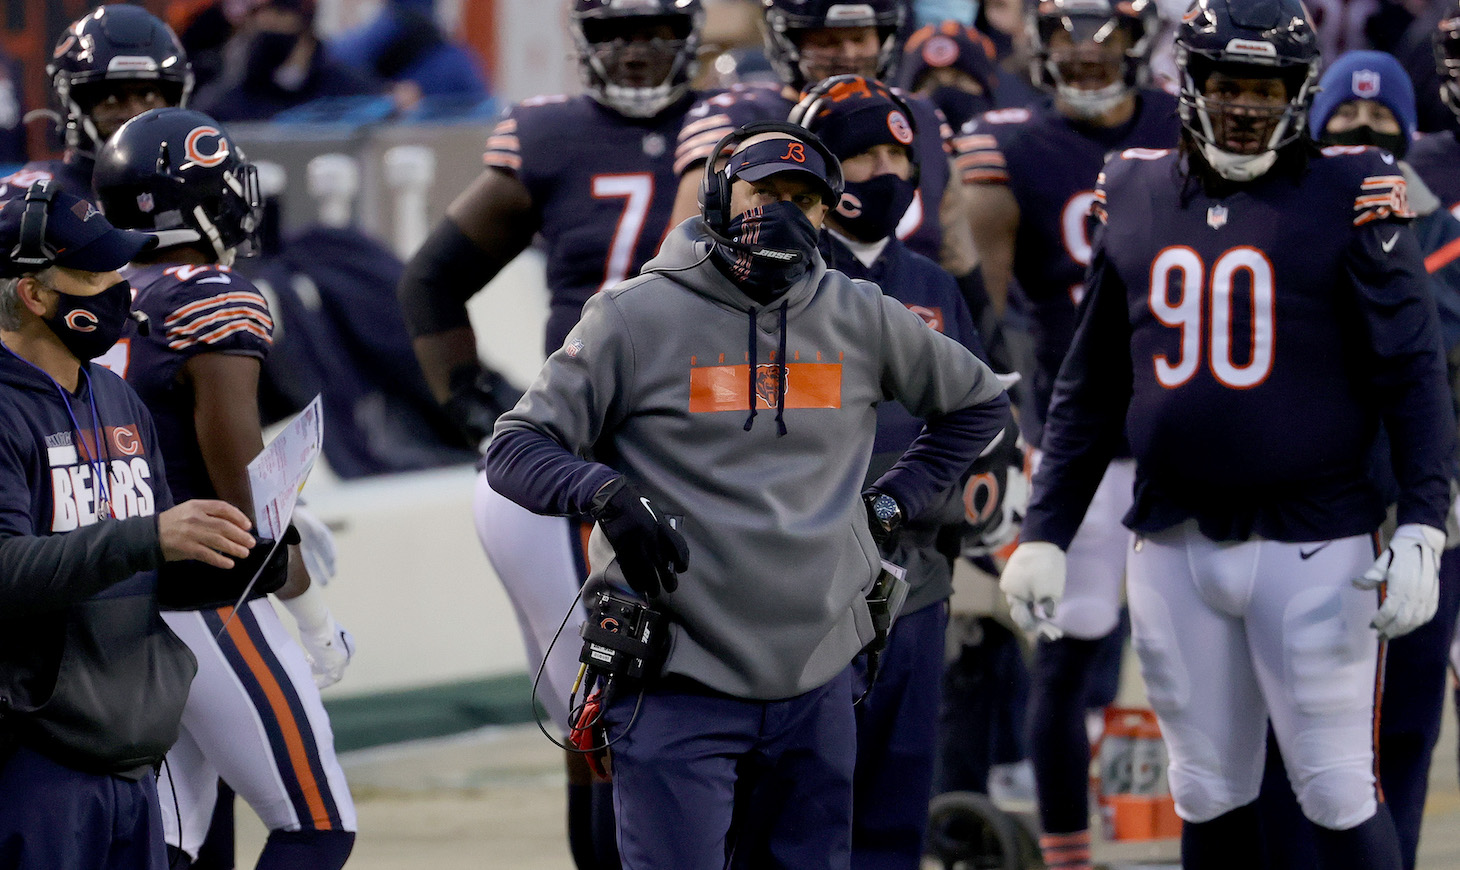 CHICAGO, ILLINOIS - JANUARY 03: Head coach Matt Nagy of the Chicago Bears looks on from the sidelines against the Green Bay Packers during the first quarter in the game at Soldier Field on January 03, 2021 in Chicago, Illinois. (Photo by Jonathan Daniel/Getty Images)